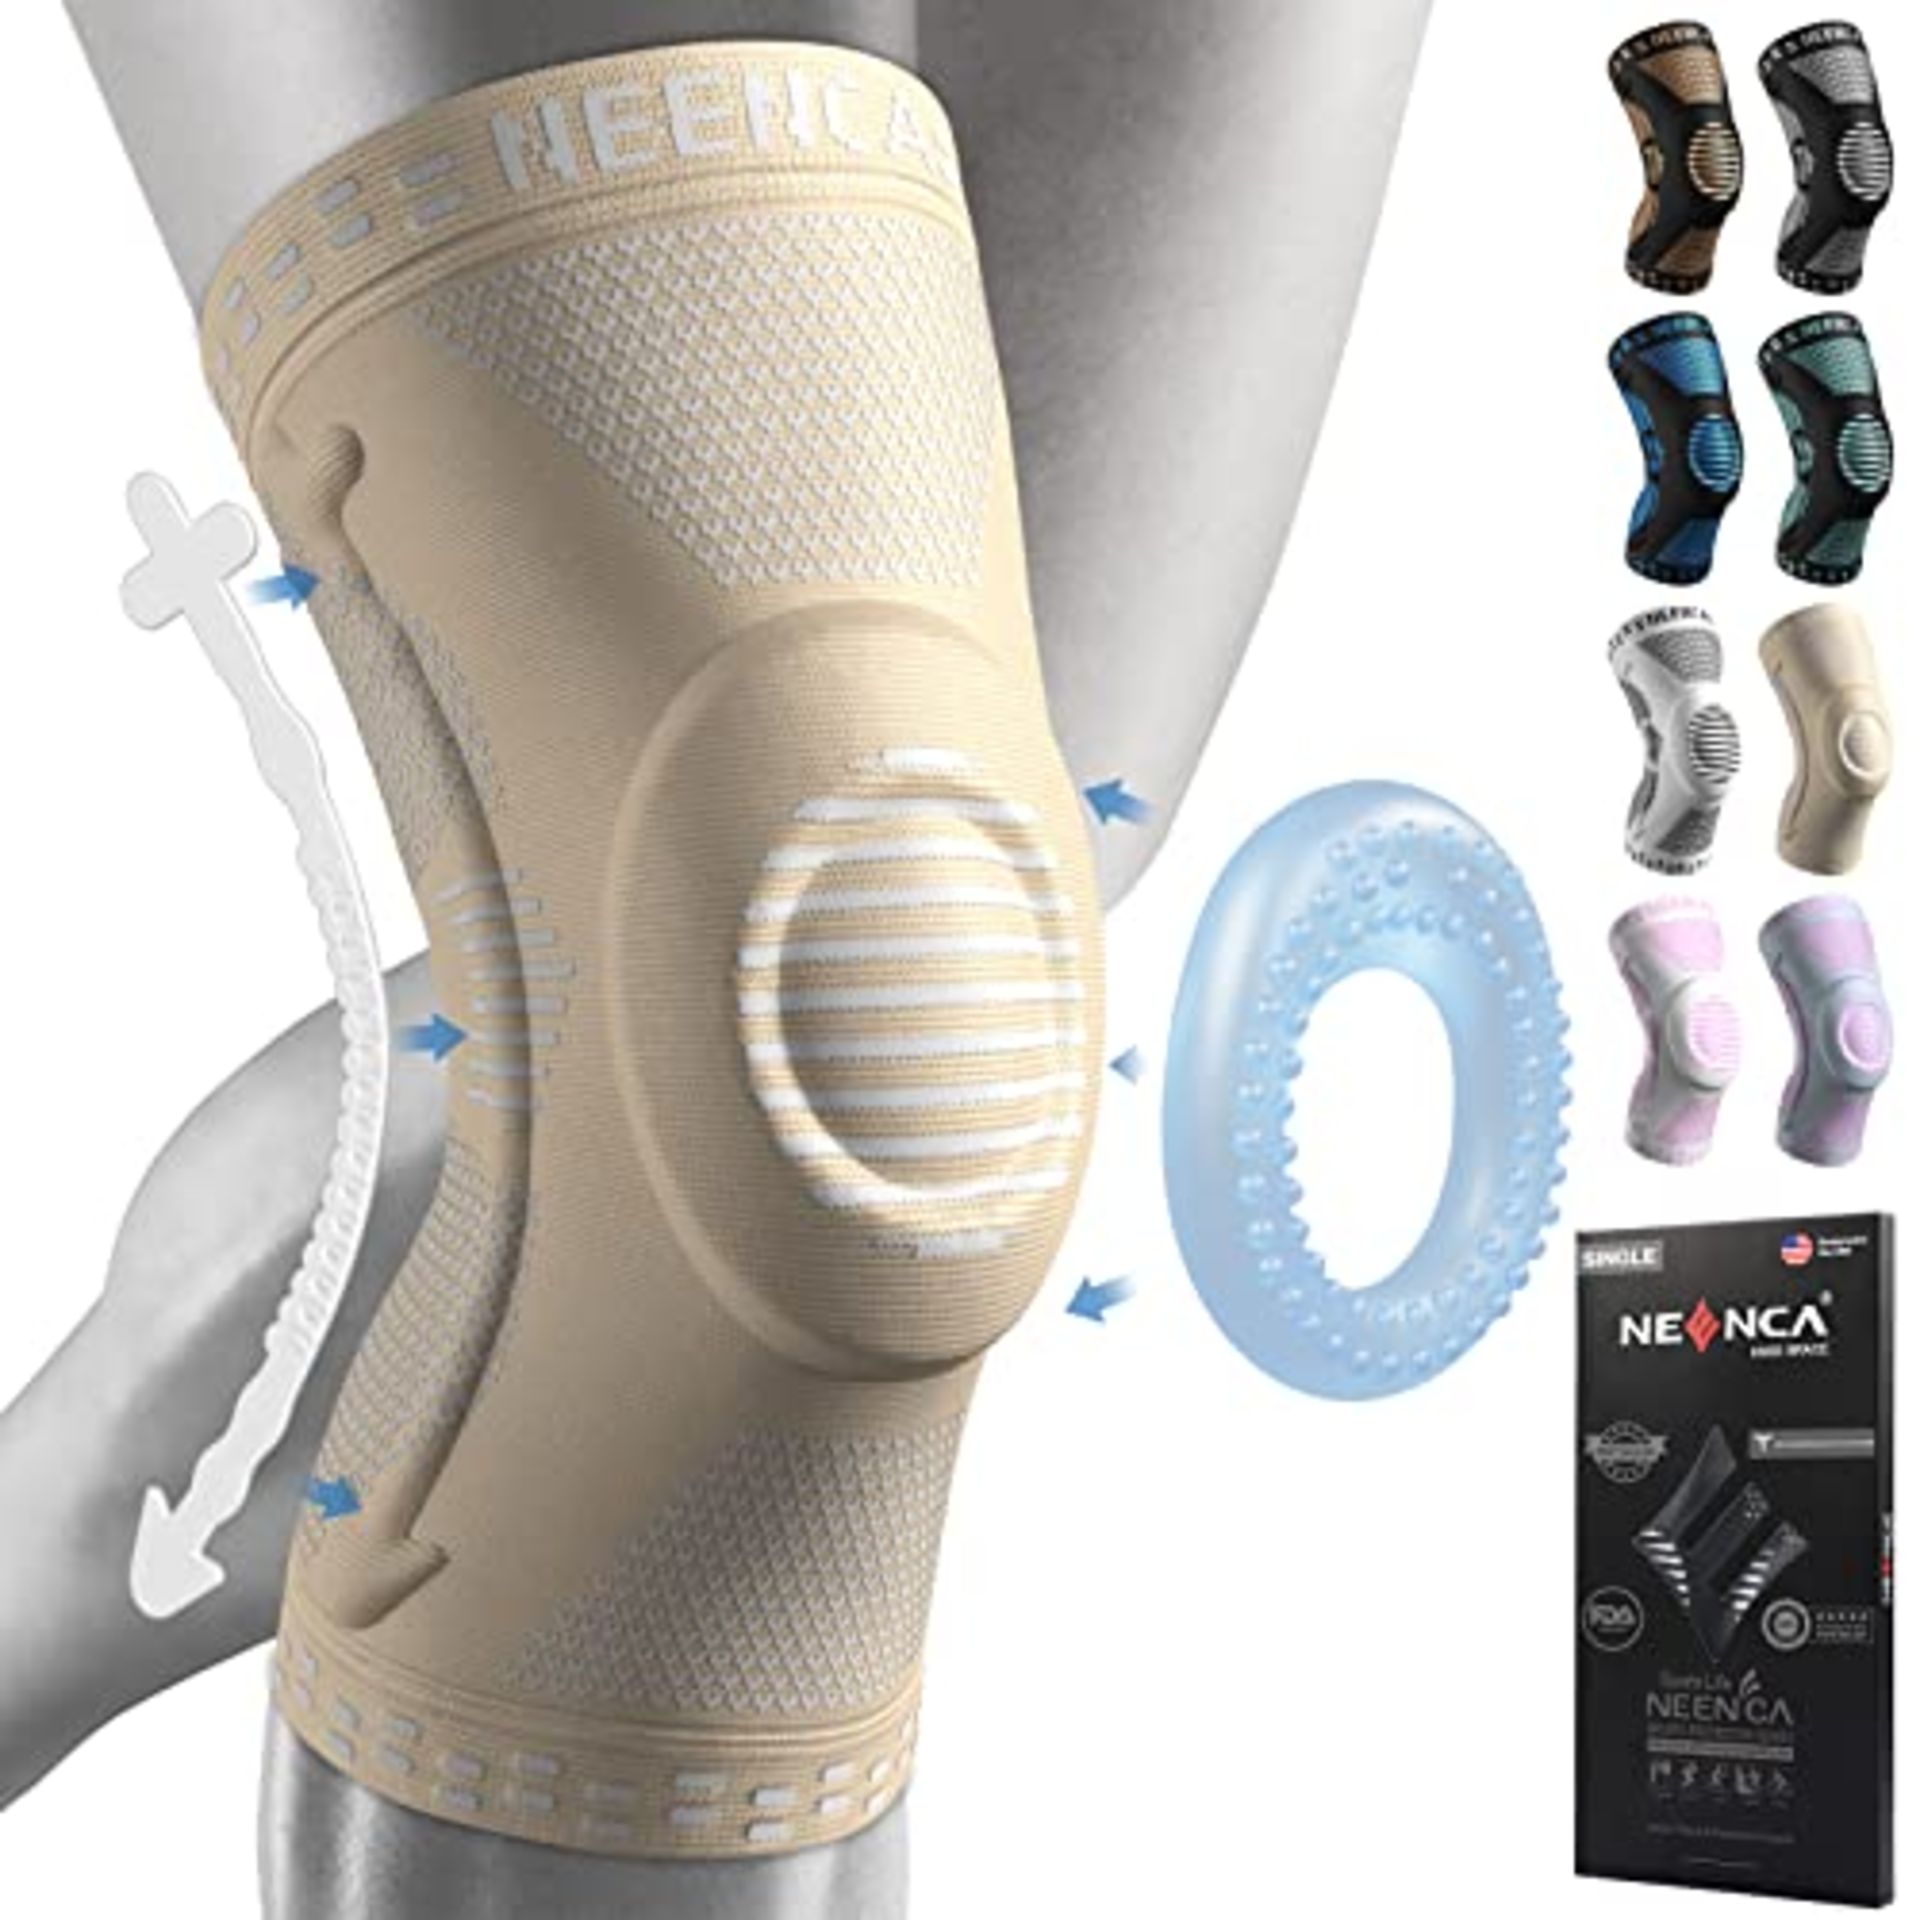 NEENCA Knee Brace,Knee Compression Sleeve Support for Men Women with Patella Gel Pads